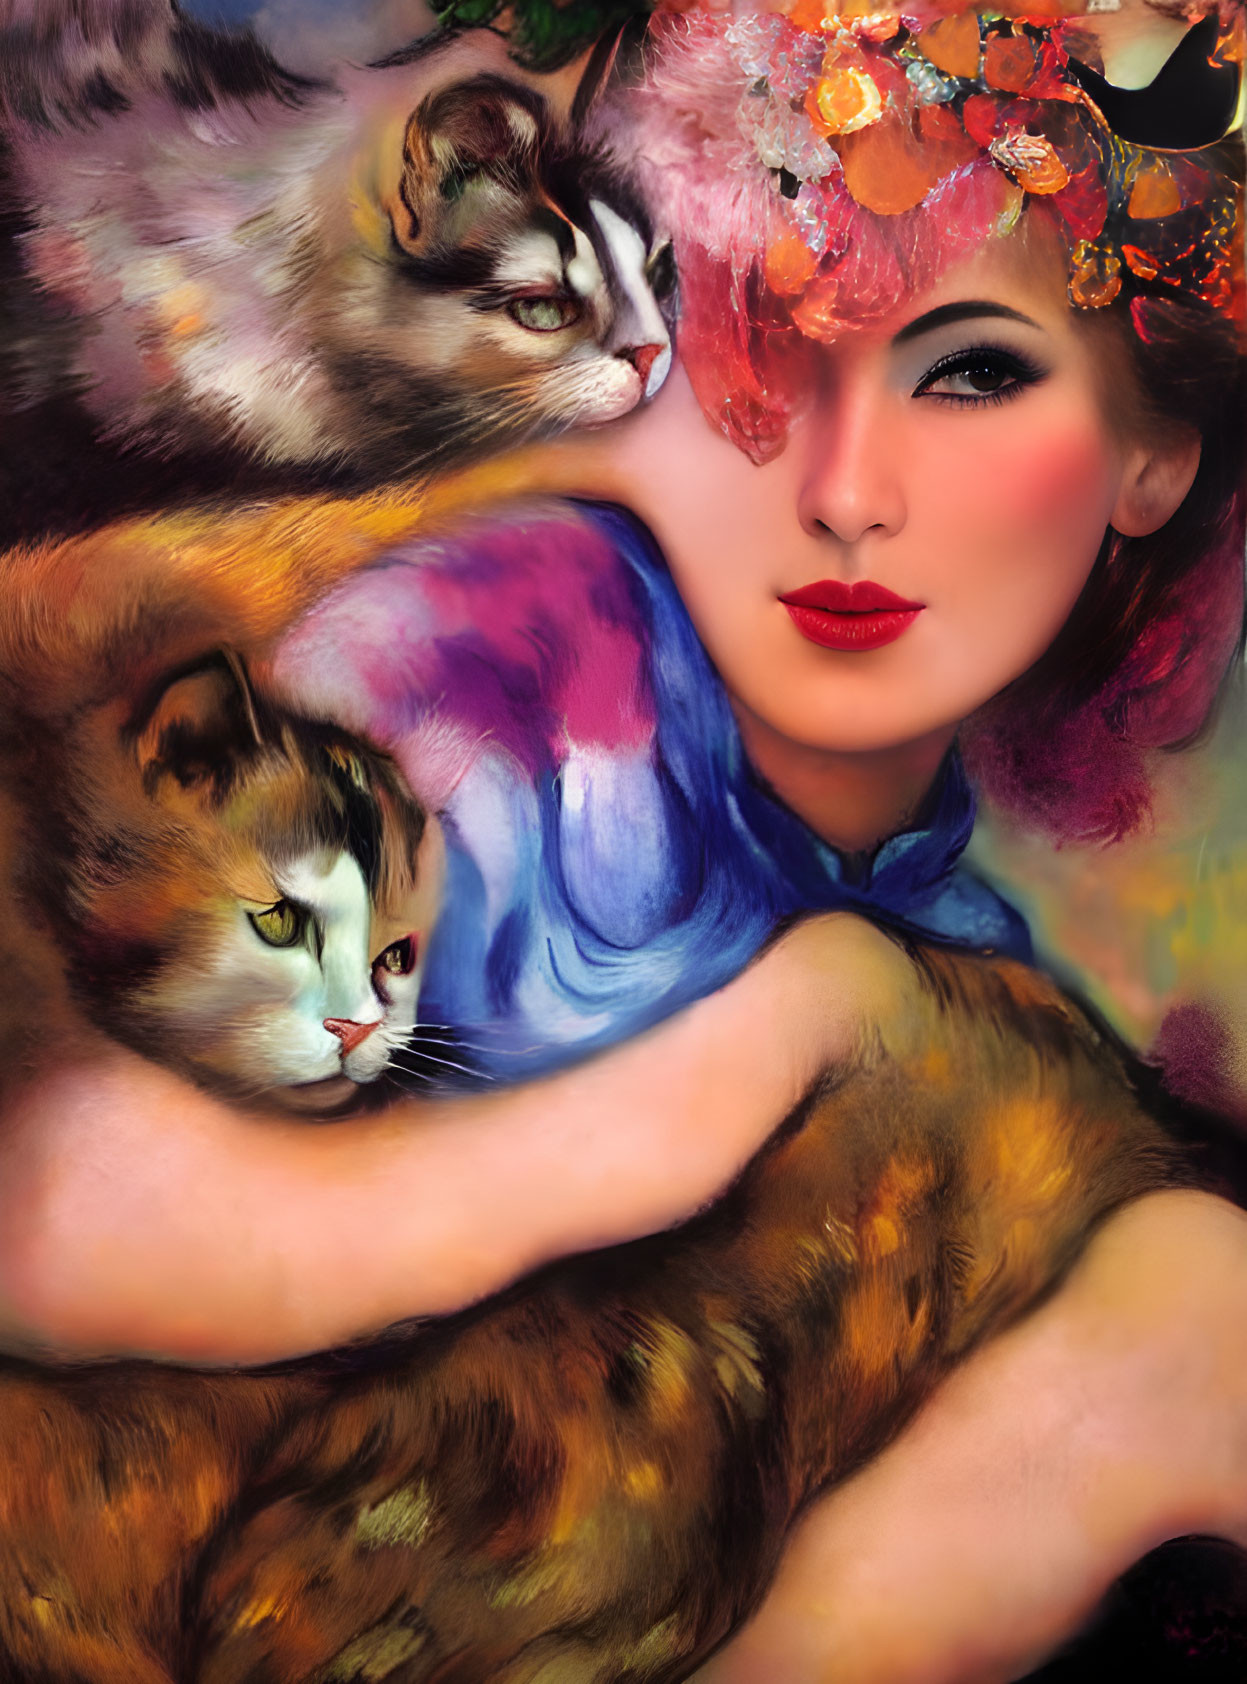 Colorful painting of woman with red lipstick, flowers in hair, and two fluffy cats.